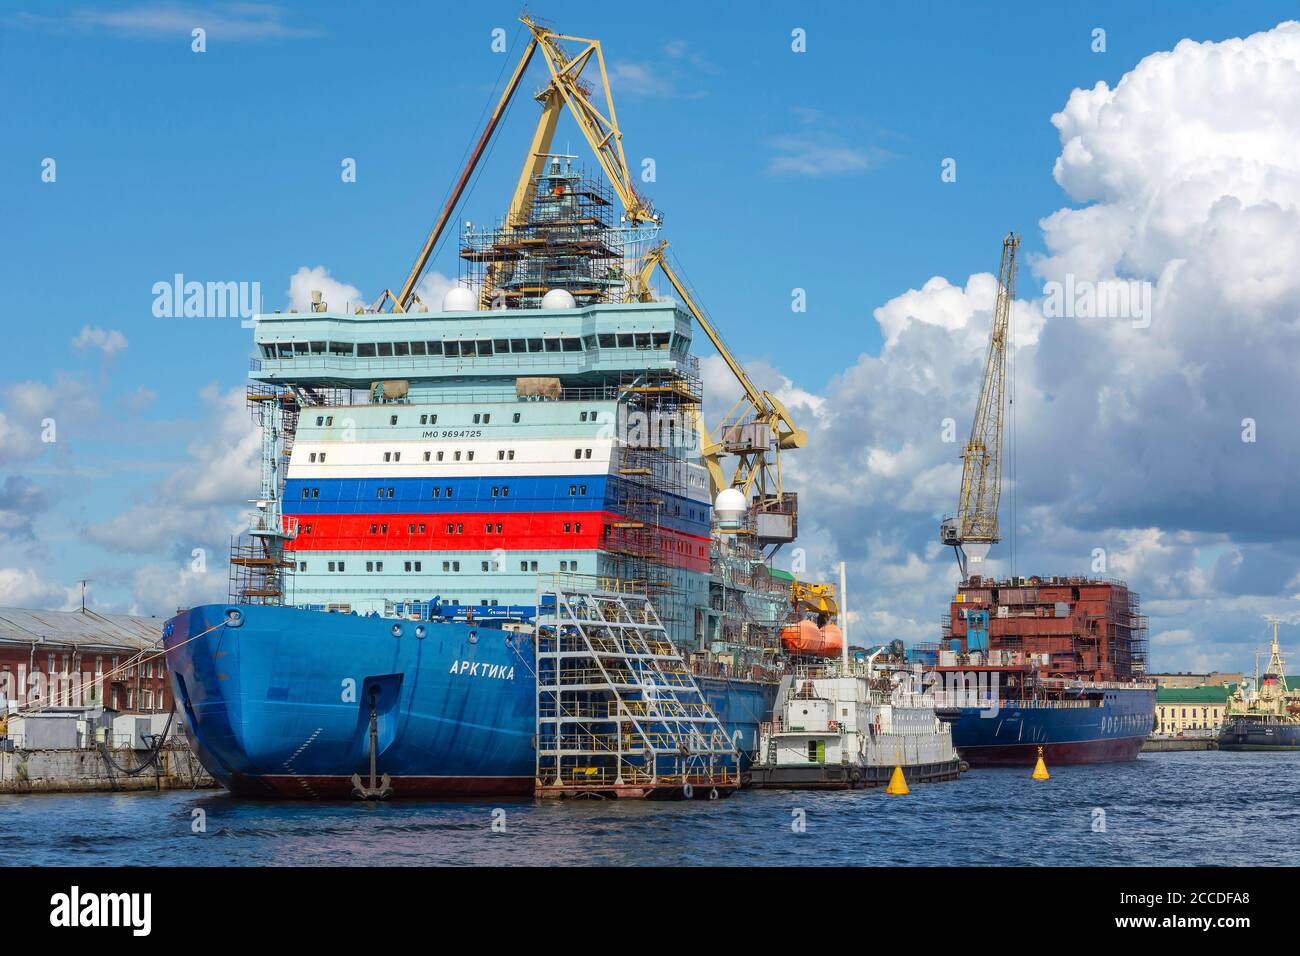 Saint Petersburg, under construction nuclear icebreaker 'Arctic' at the completion wall of the Baltic plant Stock Photo